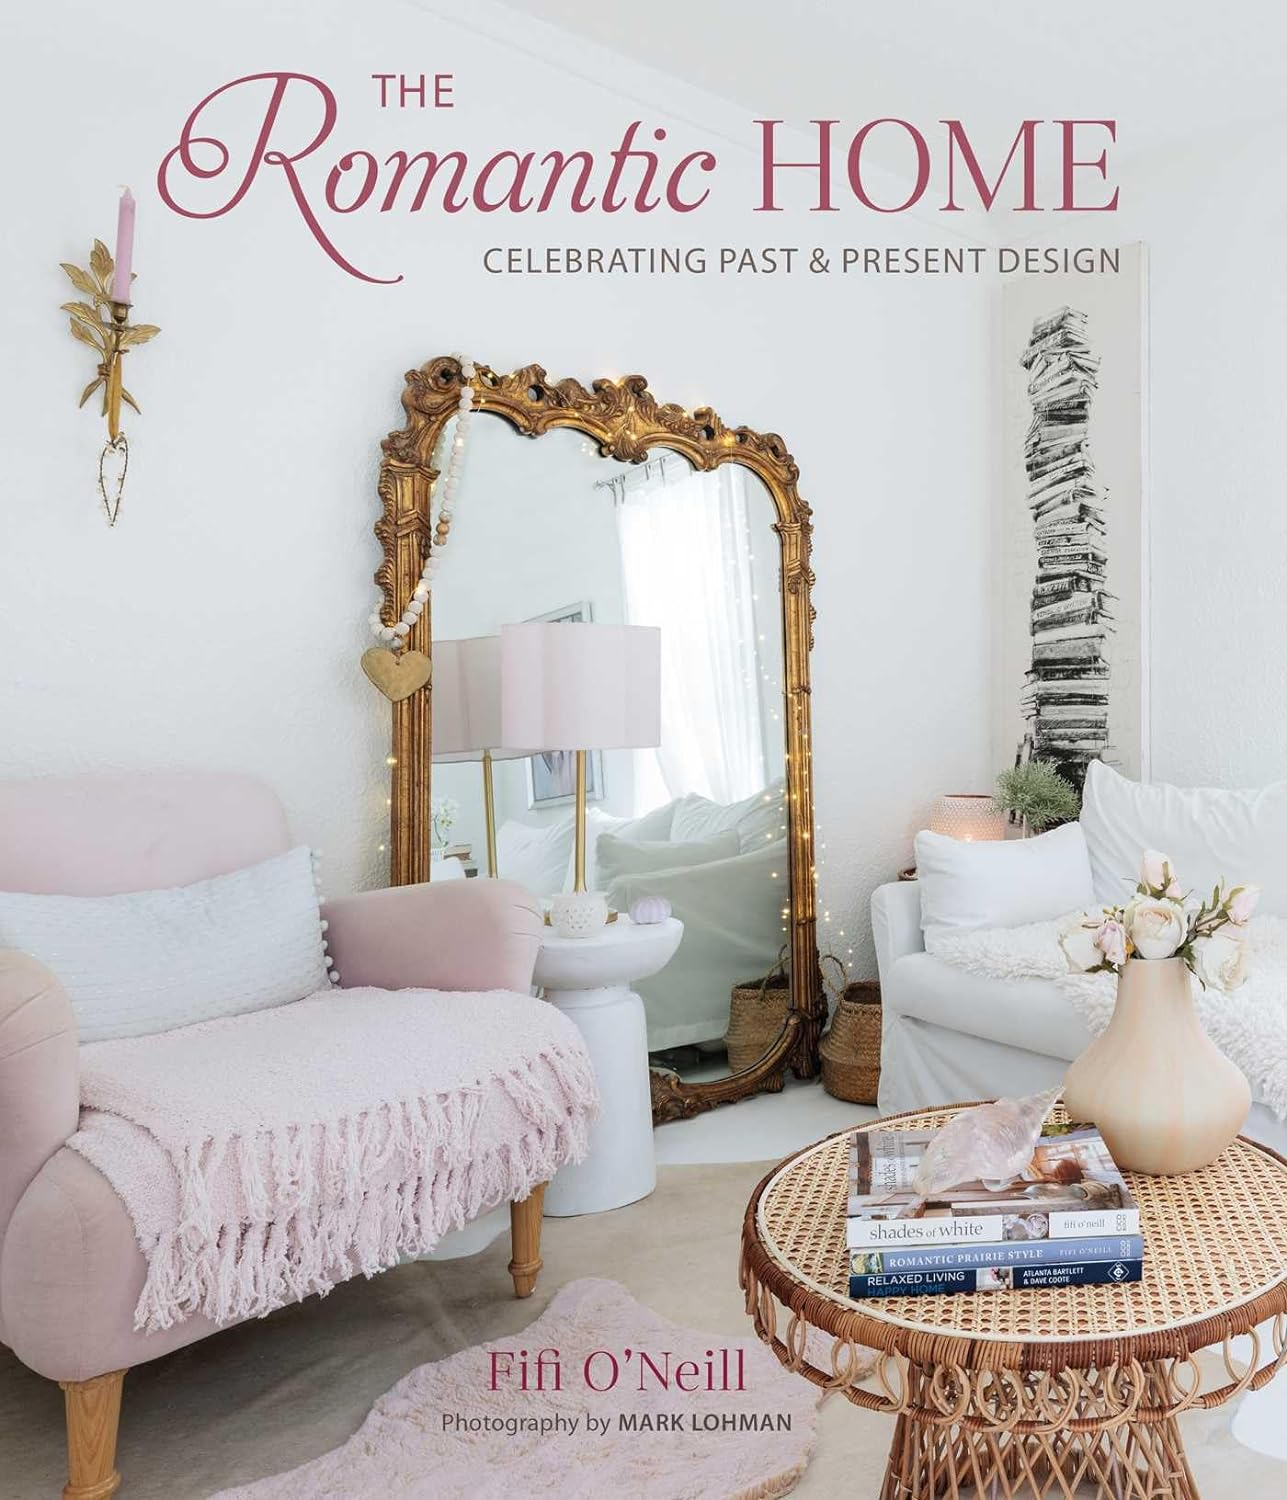 The Romantic Home by Fifi O'Neill (CICO Books, 2024) book cover. #vintagestyle #interiordesignbooks